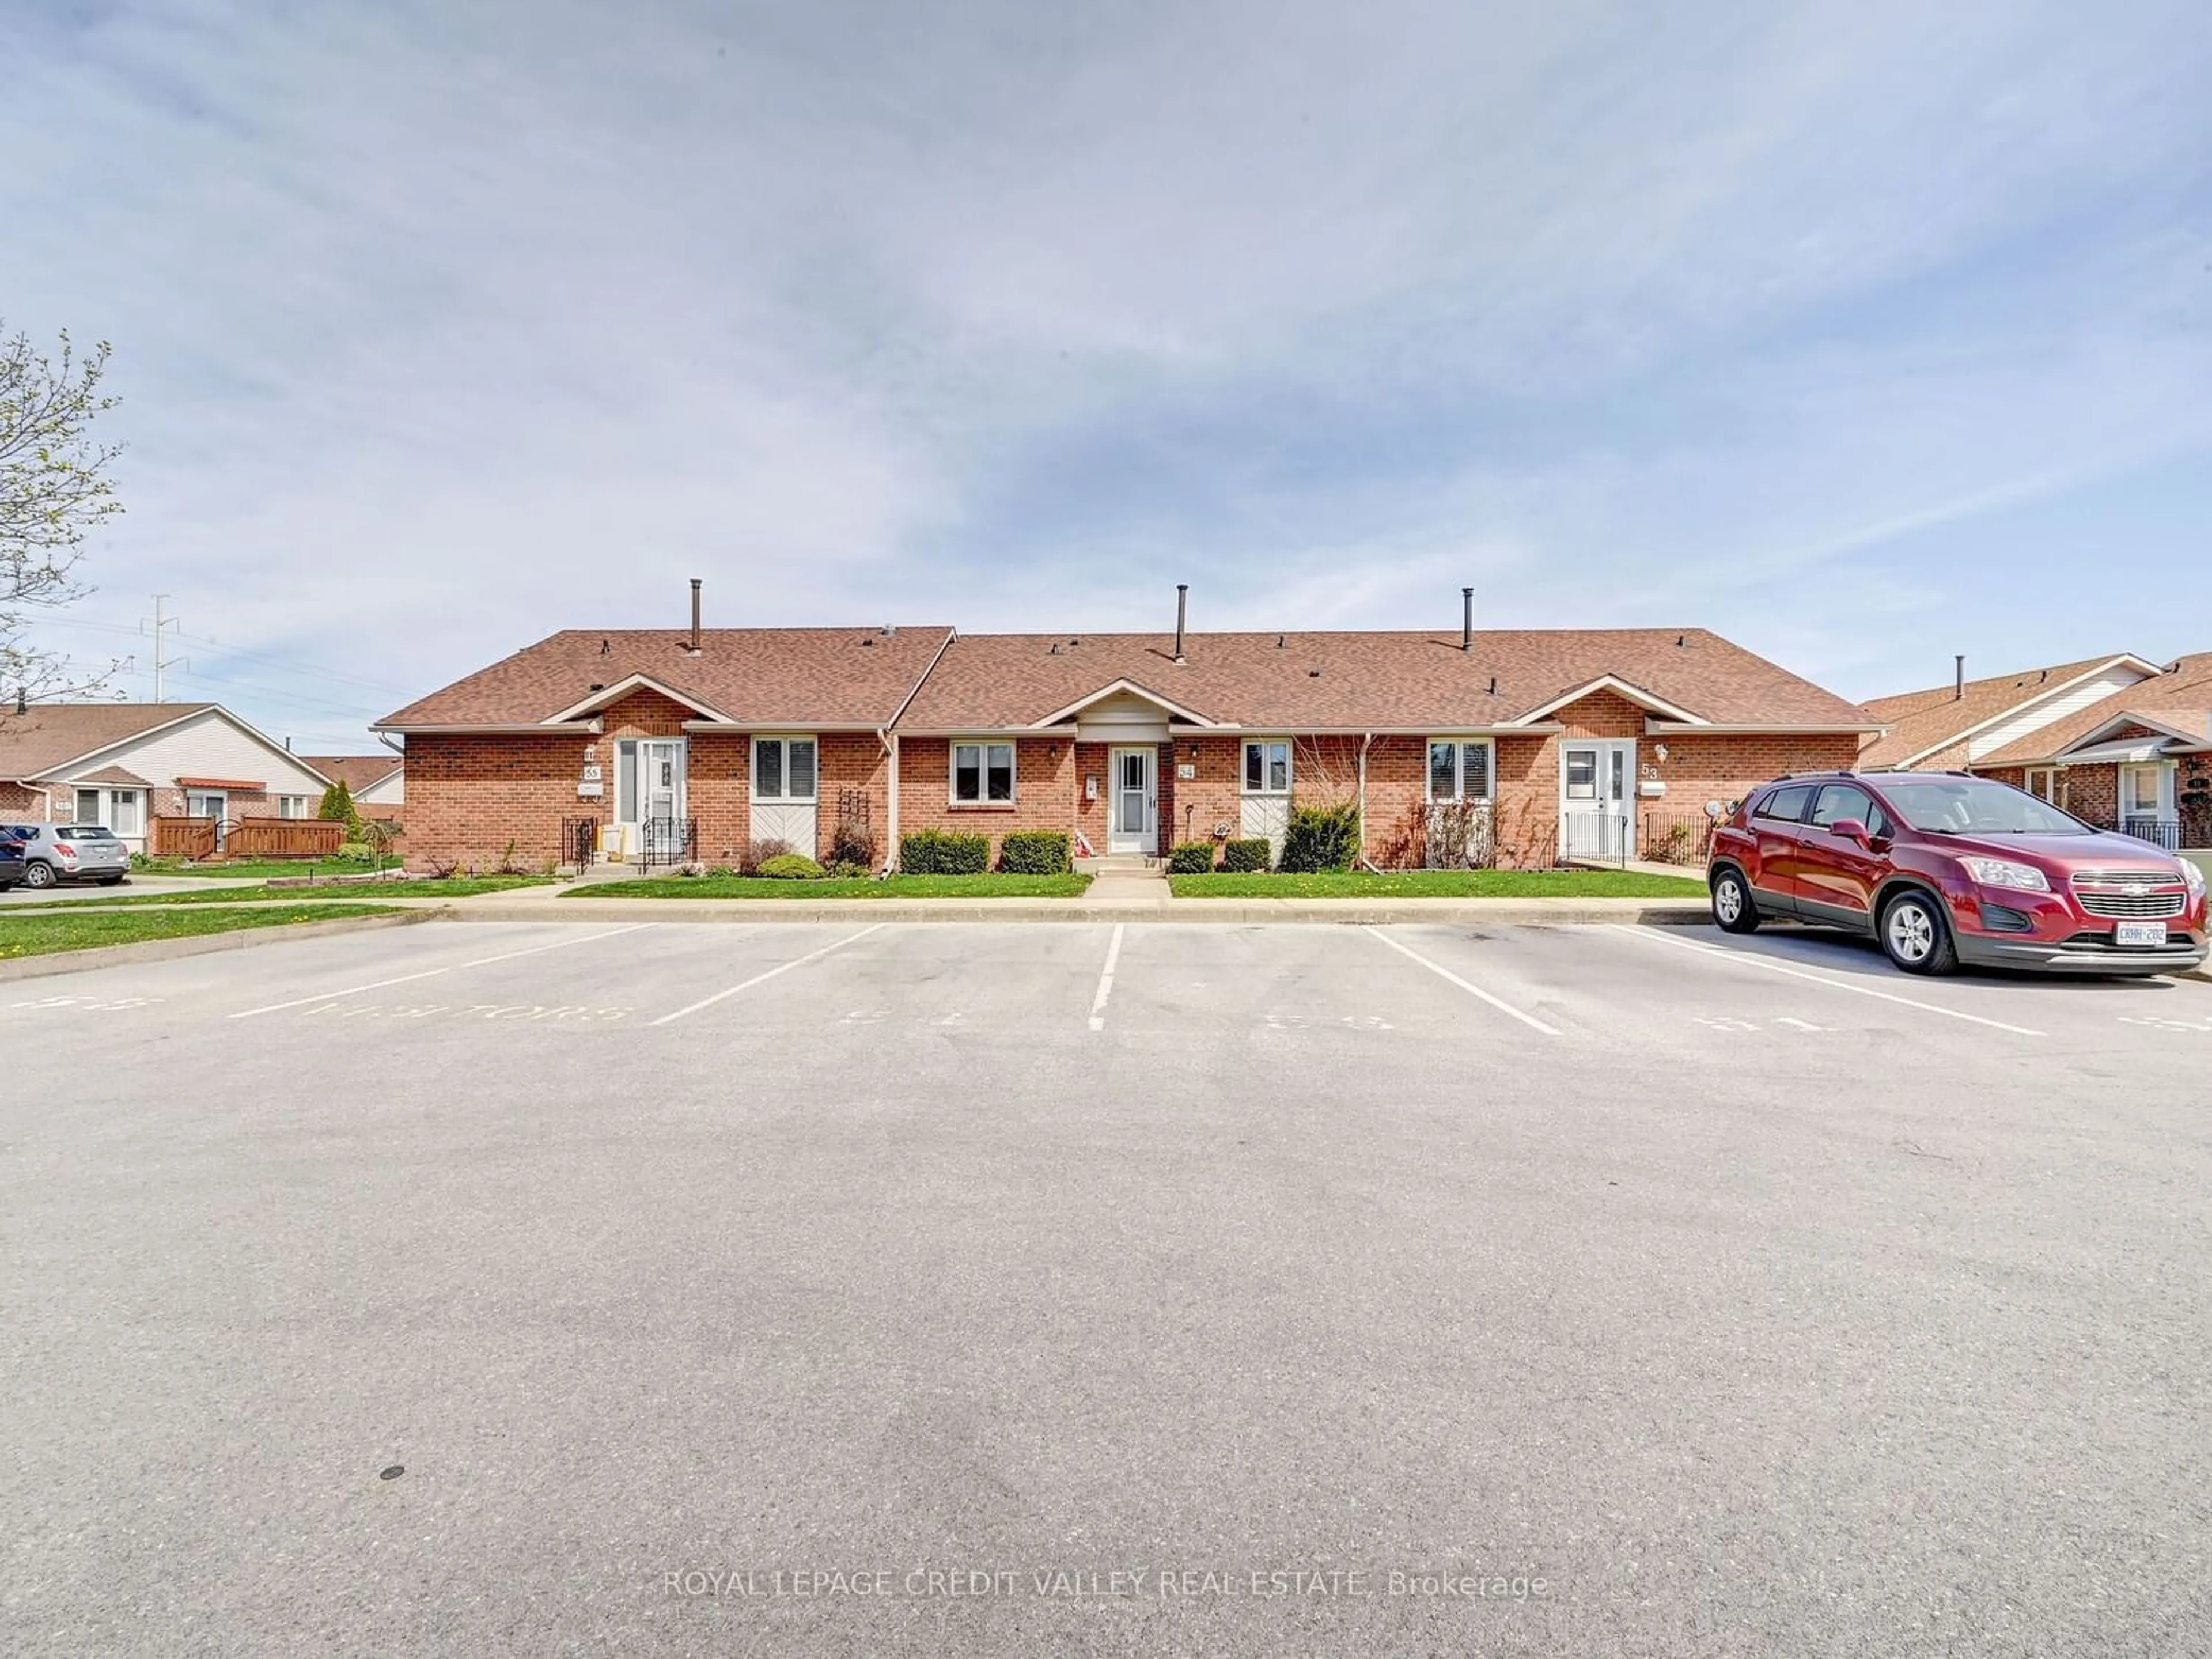 Street view for 122 Bunting Rd #53, St. Catharines Ontario L2P 3X7